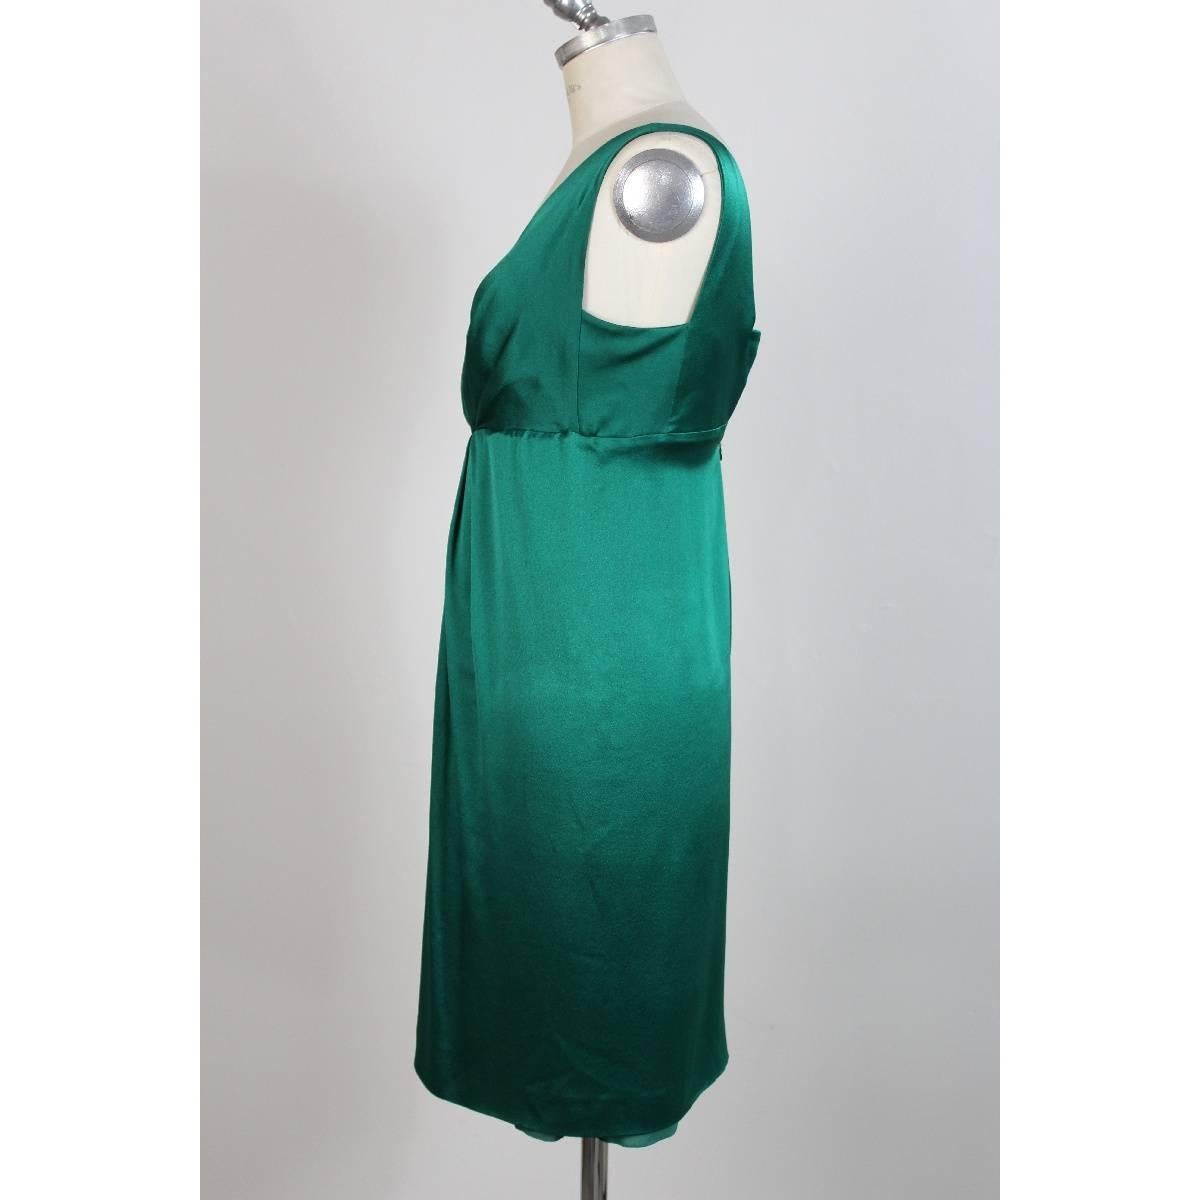 Alberta Ferretti silk emerald evening dress, knee length, sleeveless, V-neckline, zip closure, size 40 it, made italy, excellent condition.

Size 40 (IT); 6 US; 8 UK

Measures
Shoulder: 40 cm
Bust / chest: 43 cm
Length: 81 cm

Composition: 100%